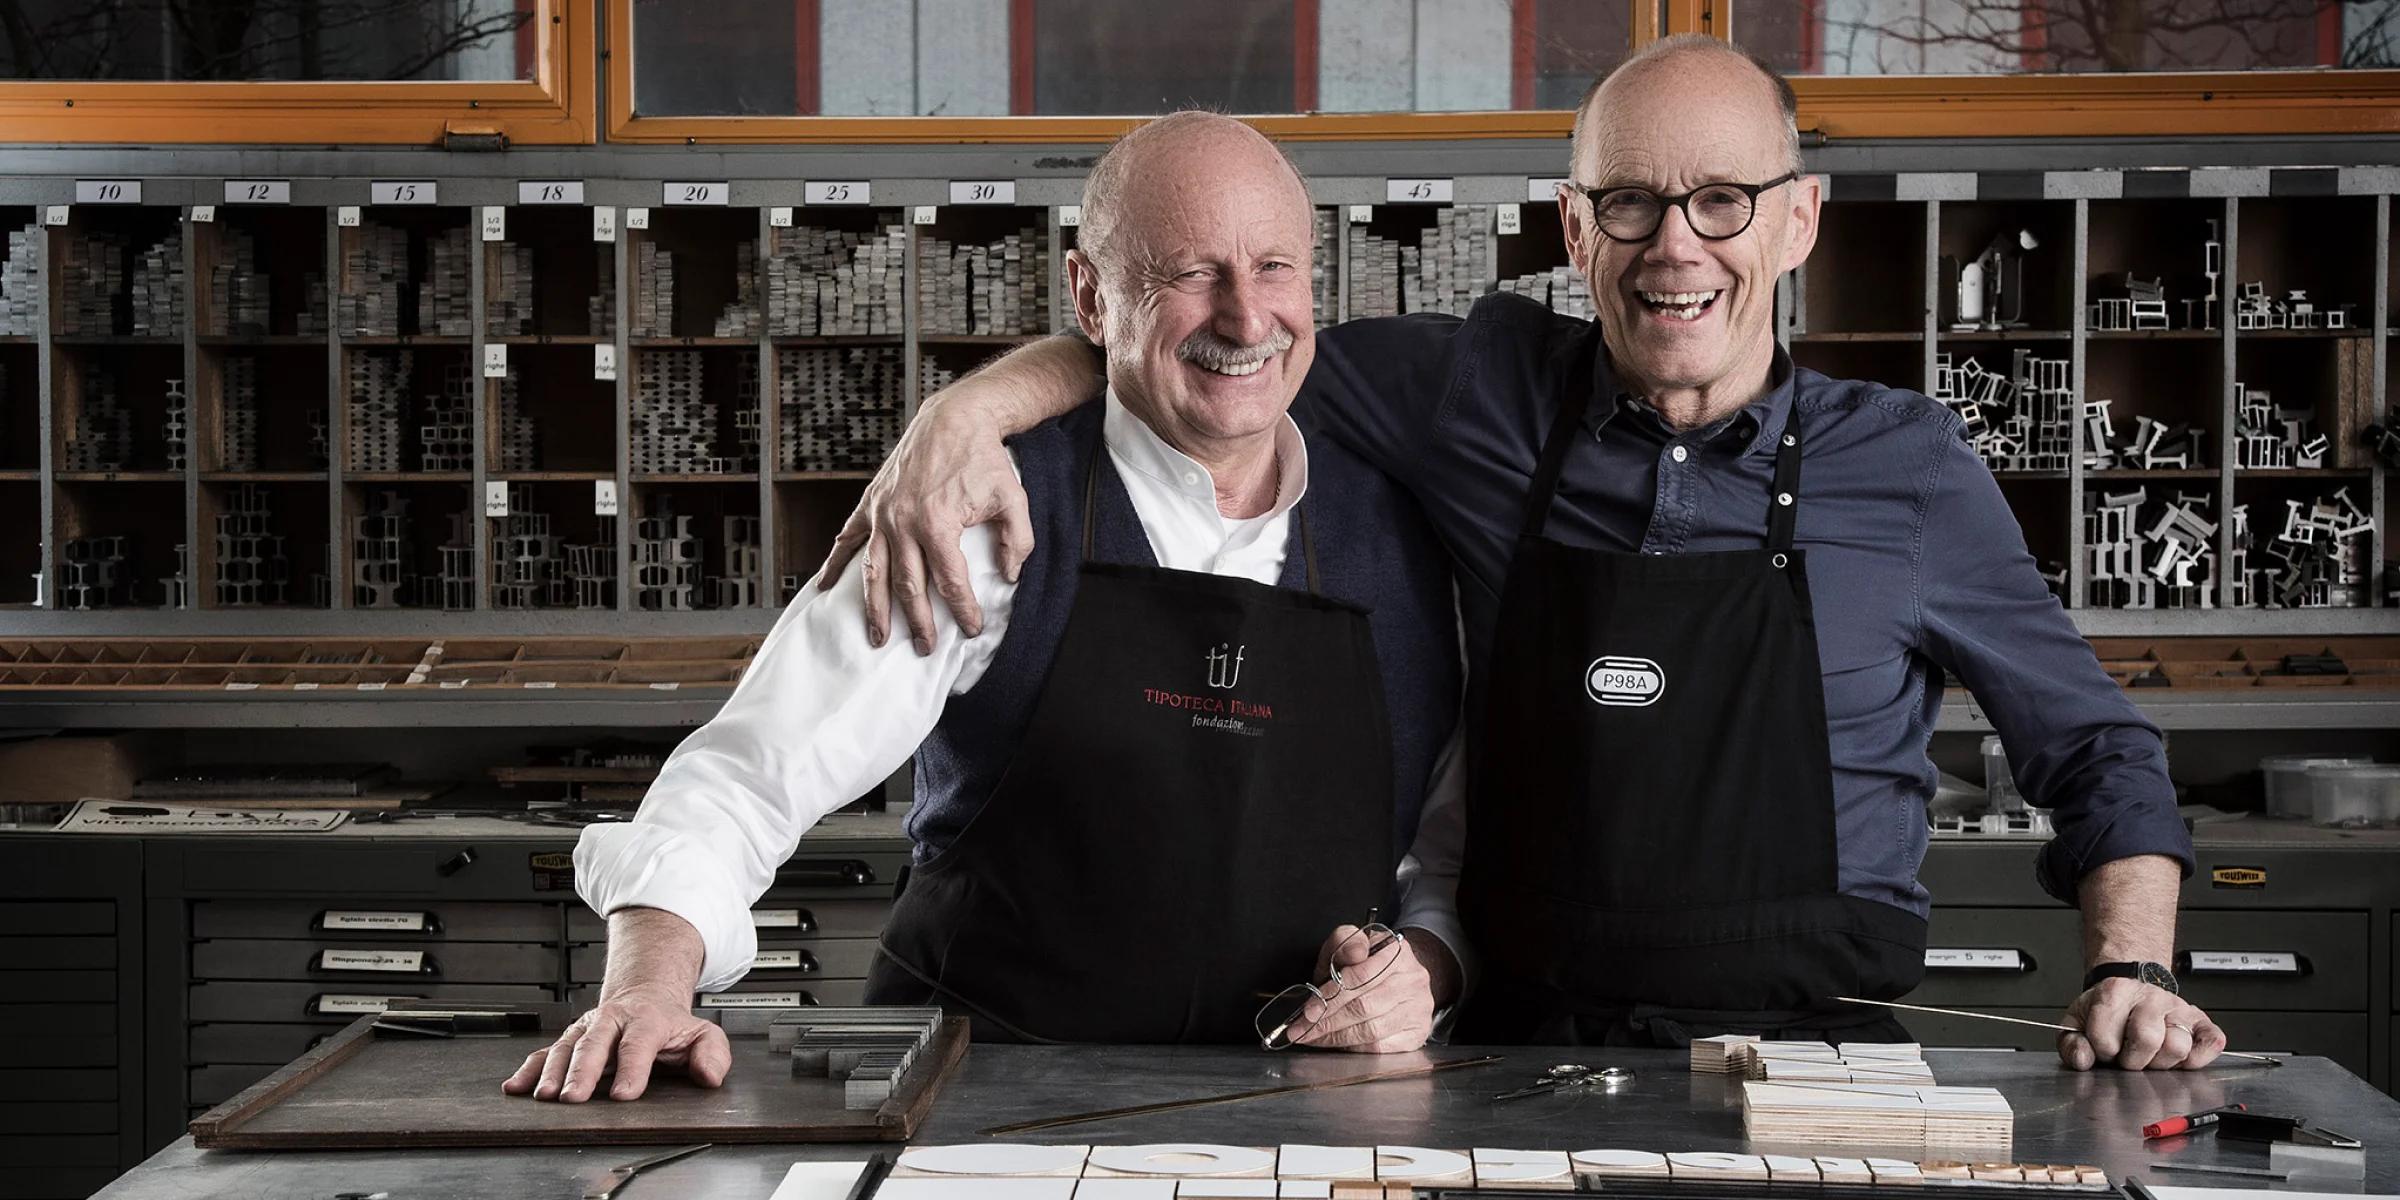 Two men laughing in a workshop setting